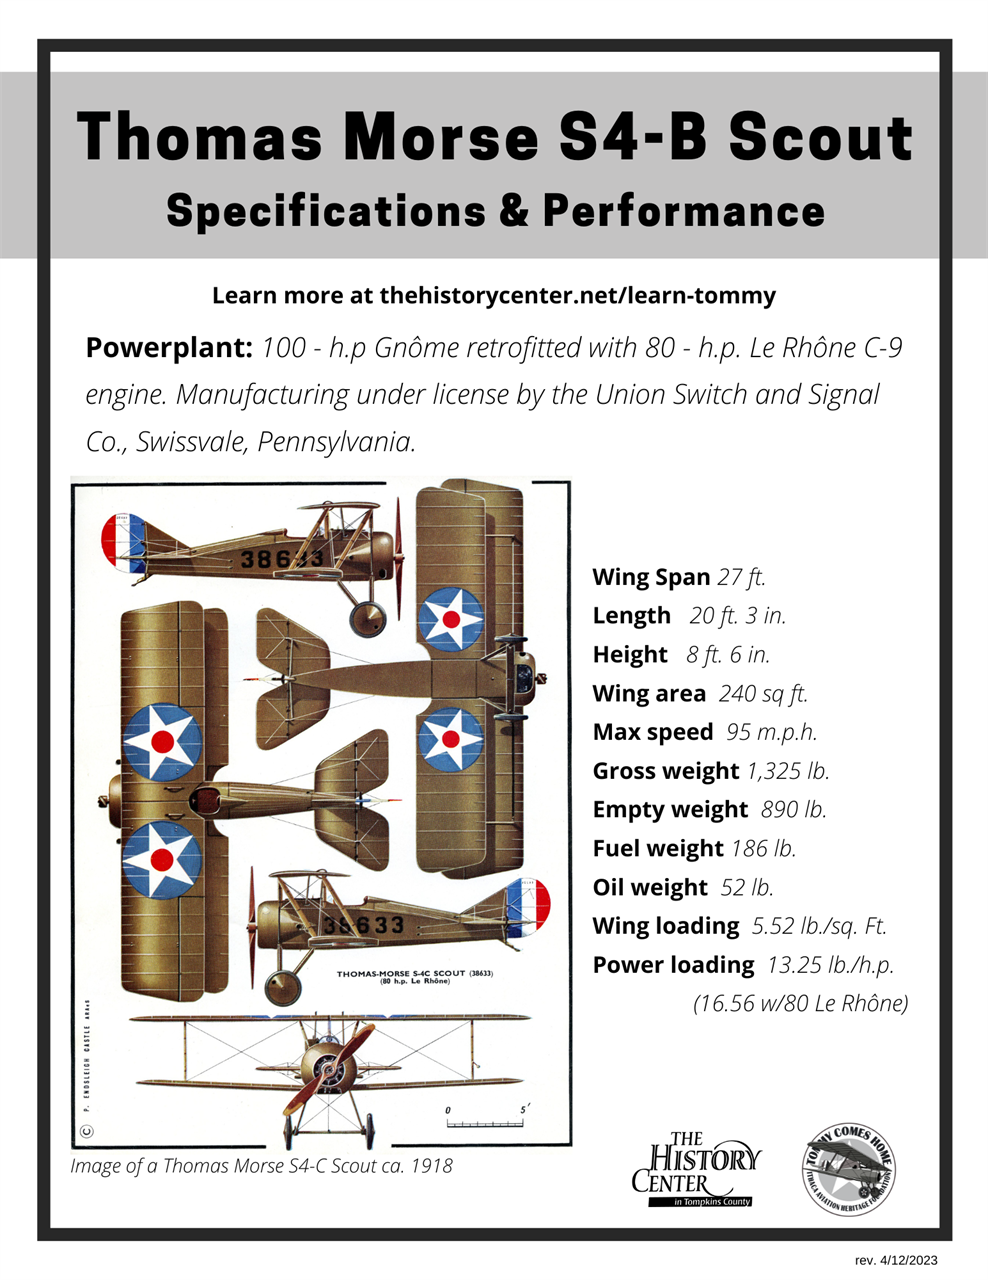 Thomas more scout plane specification and performance sheet